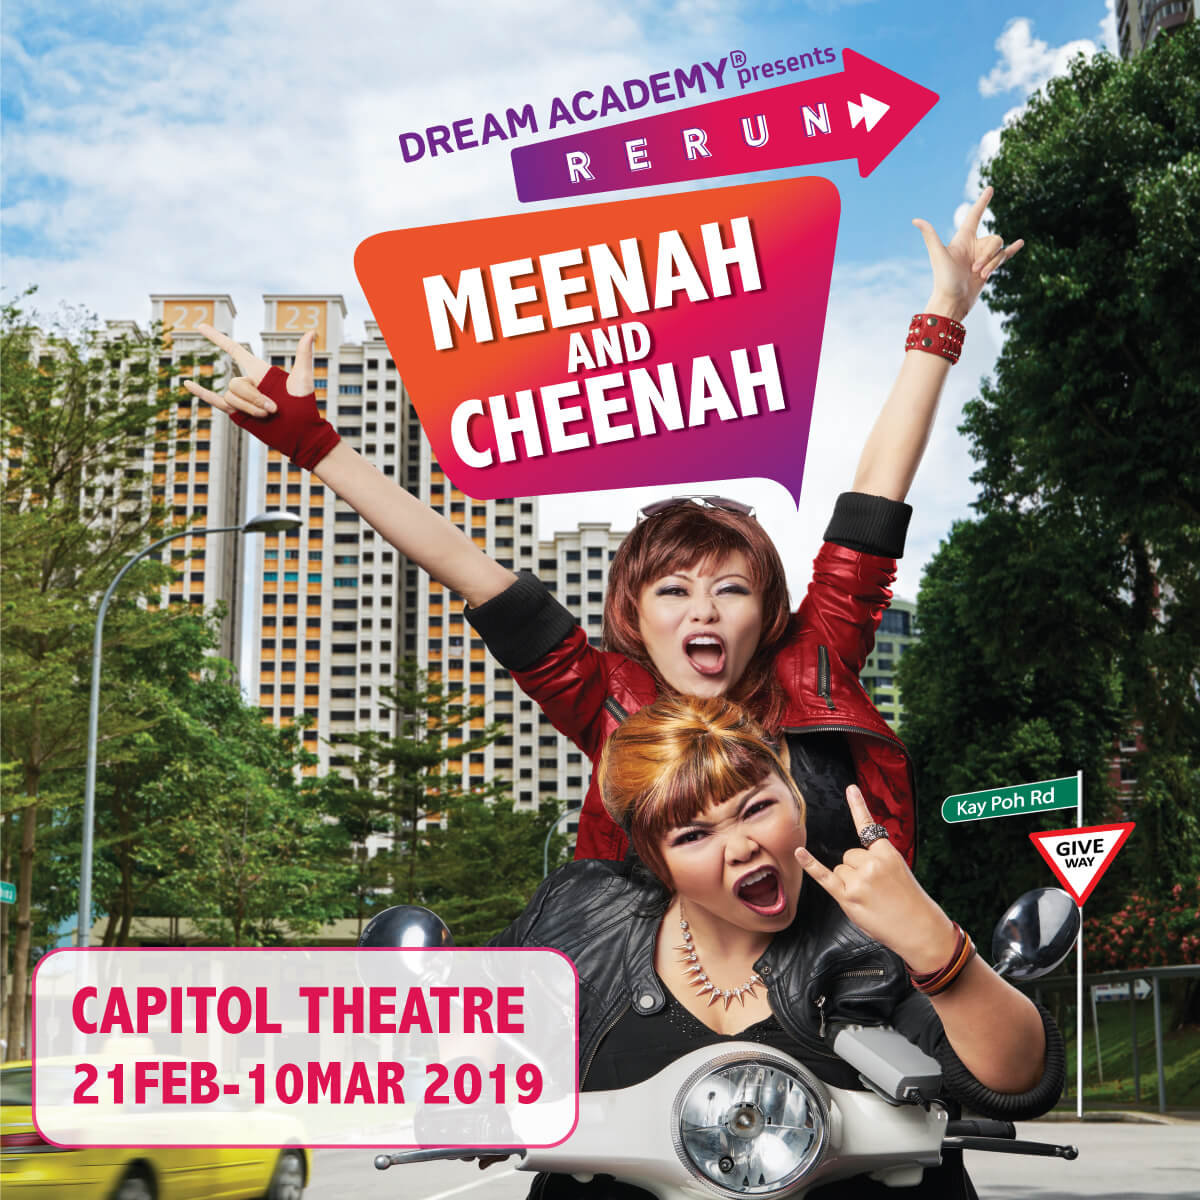 [Exclusive] Meenah And Cheenah - Laugh Out Loud To Singapore's Favourite Comedic Duo!